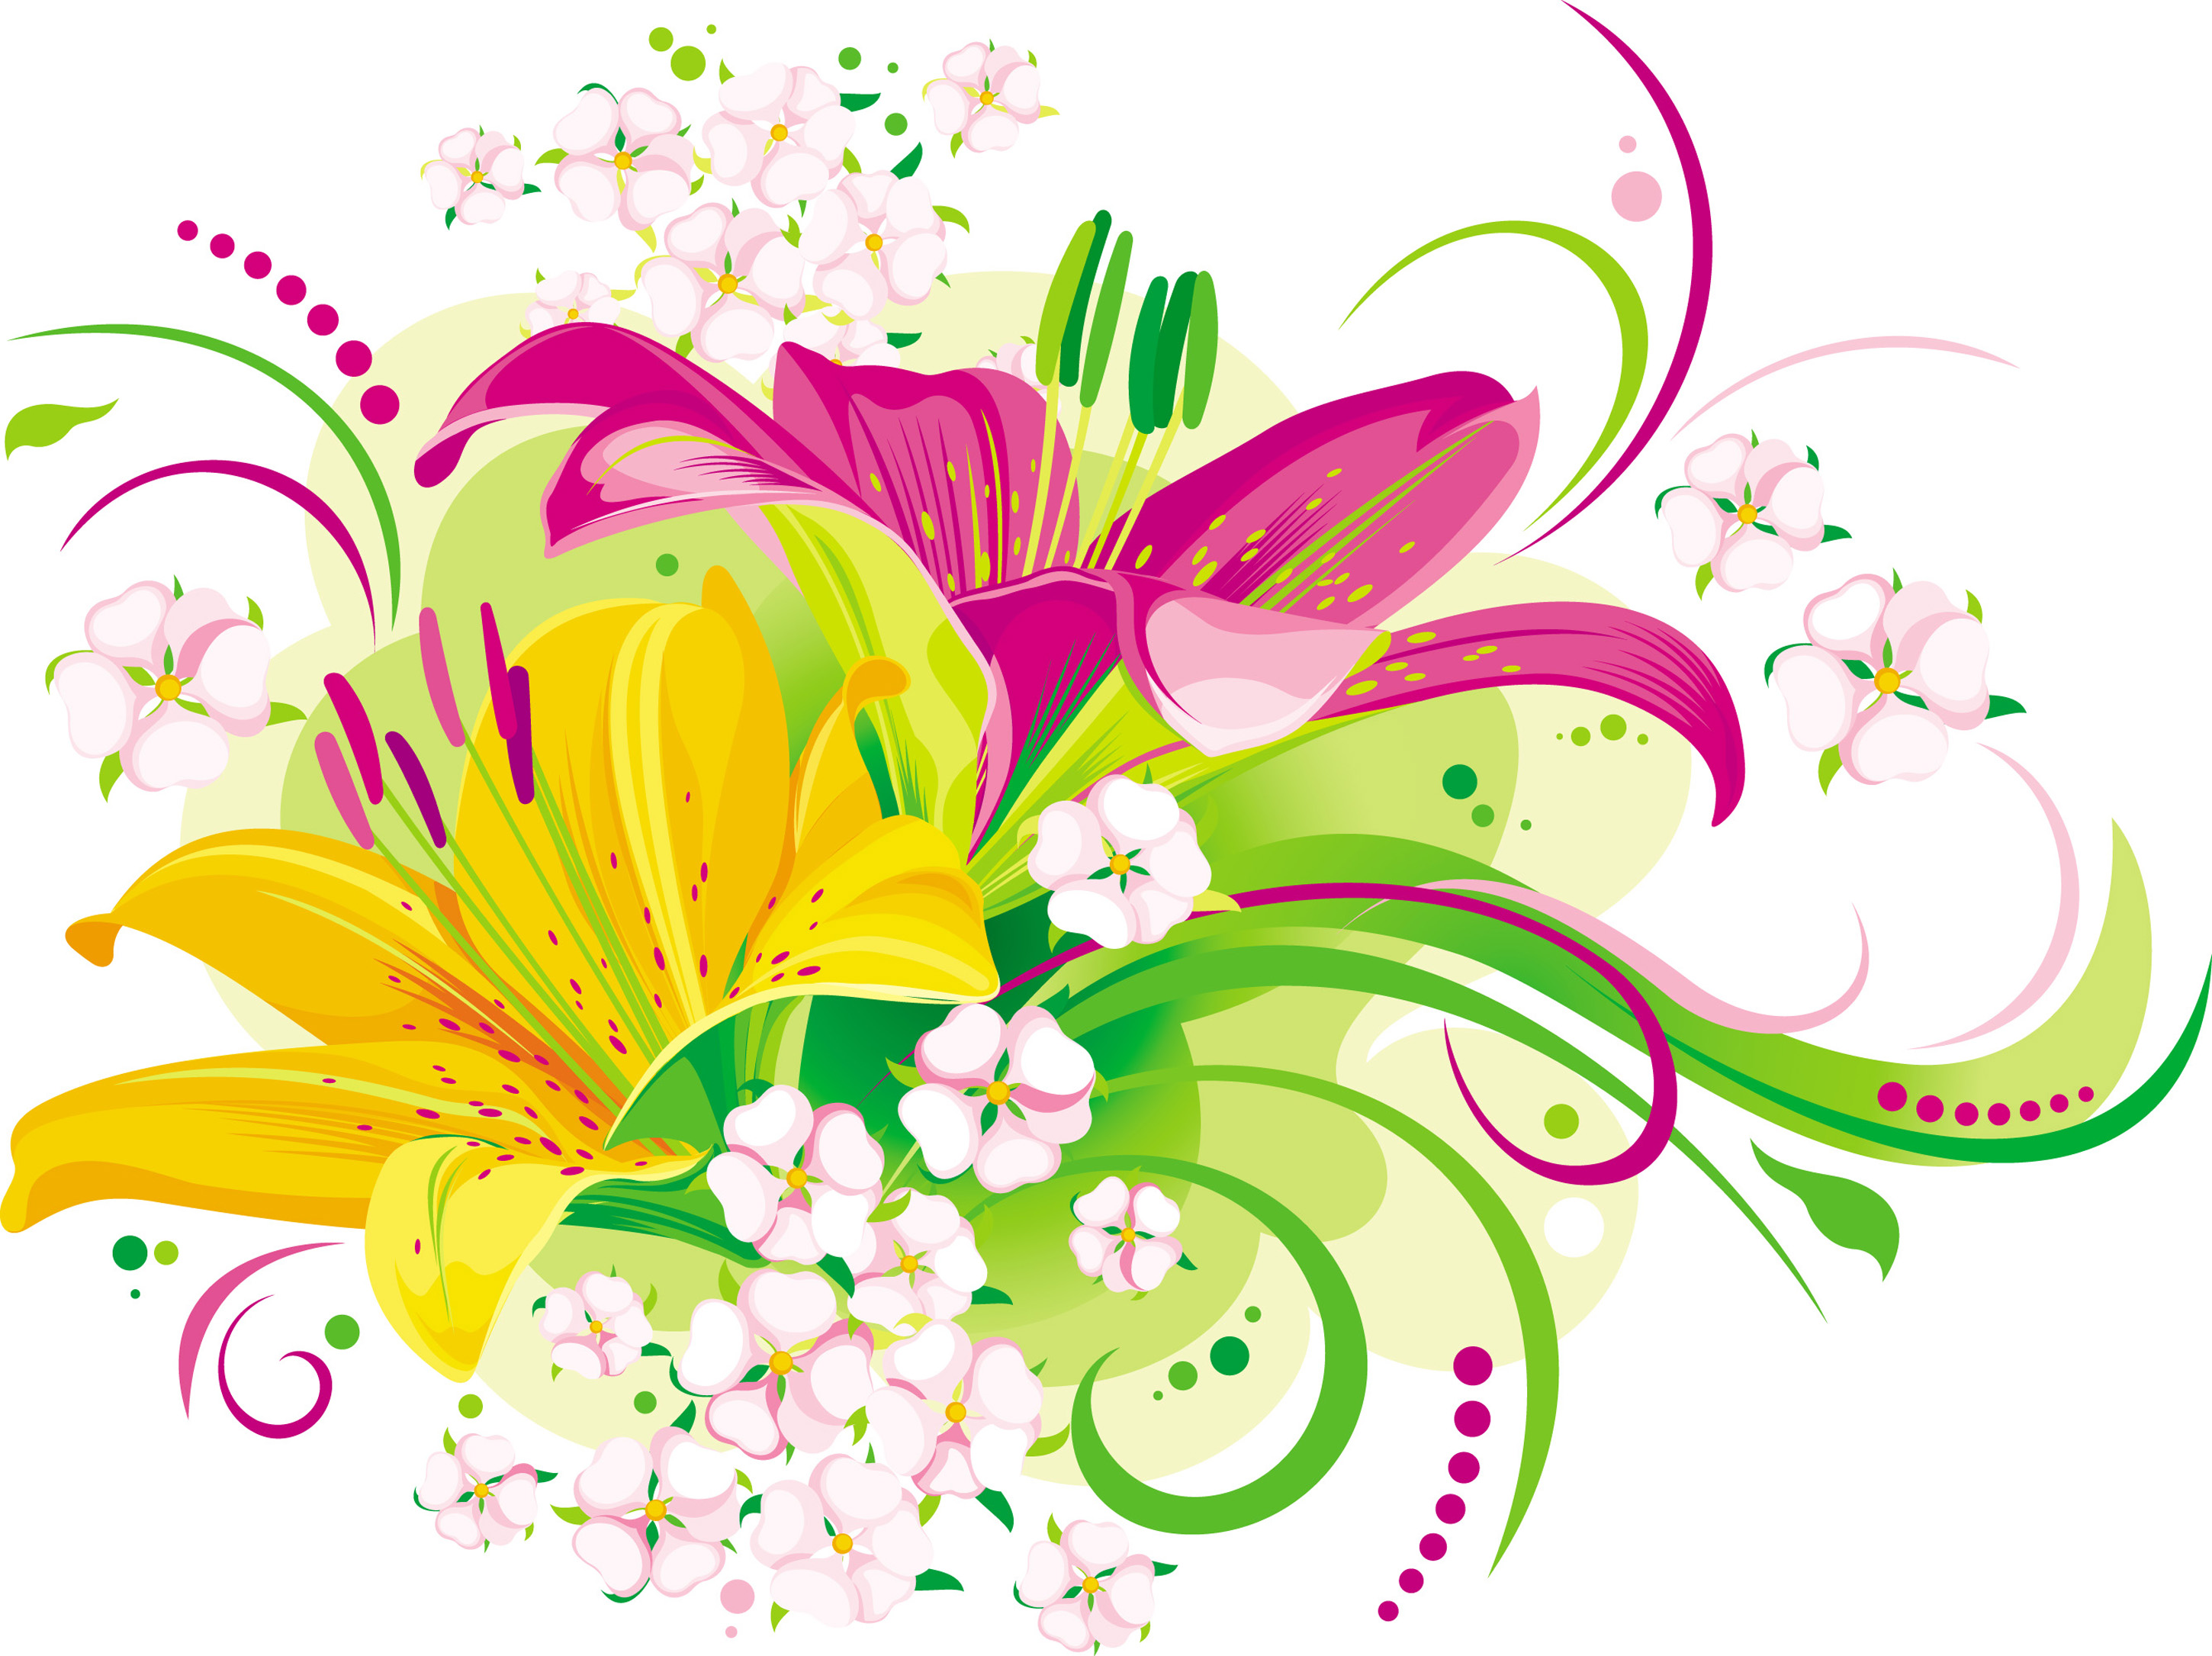 free vector clipart flowers - photo #17